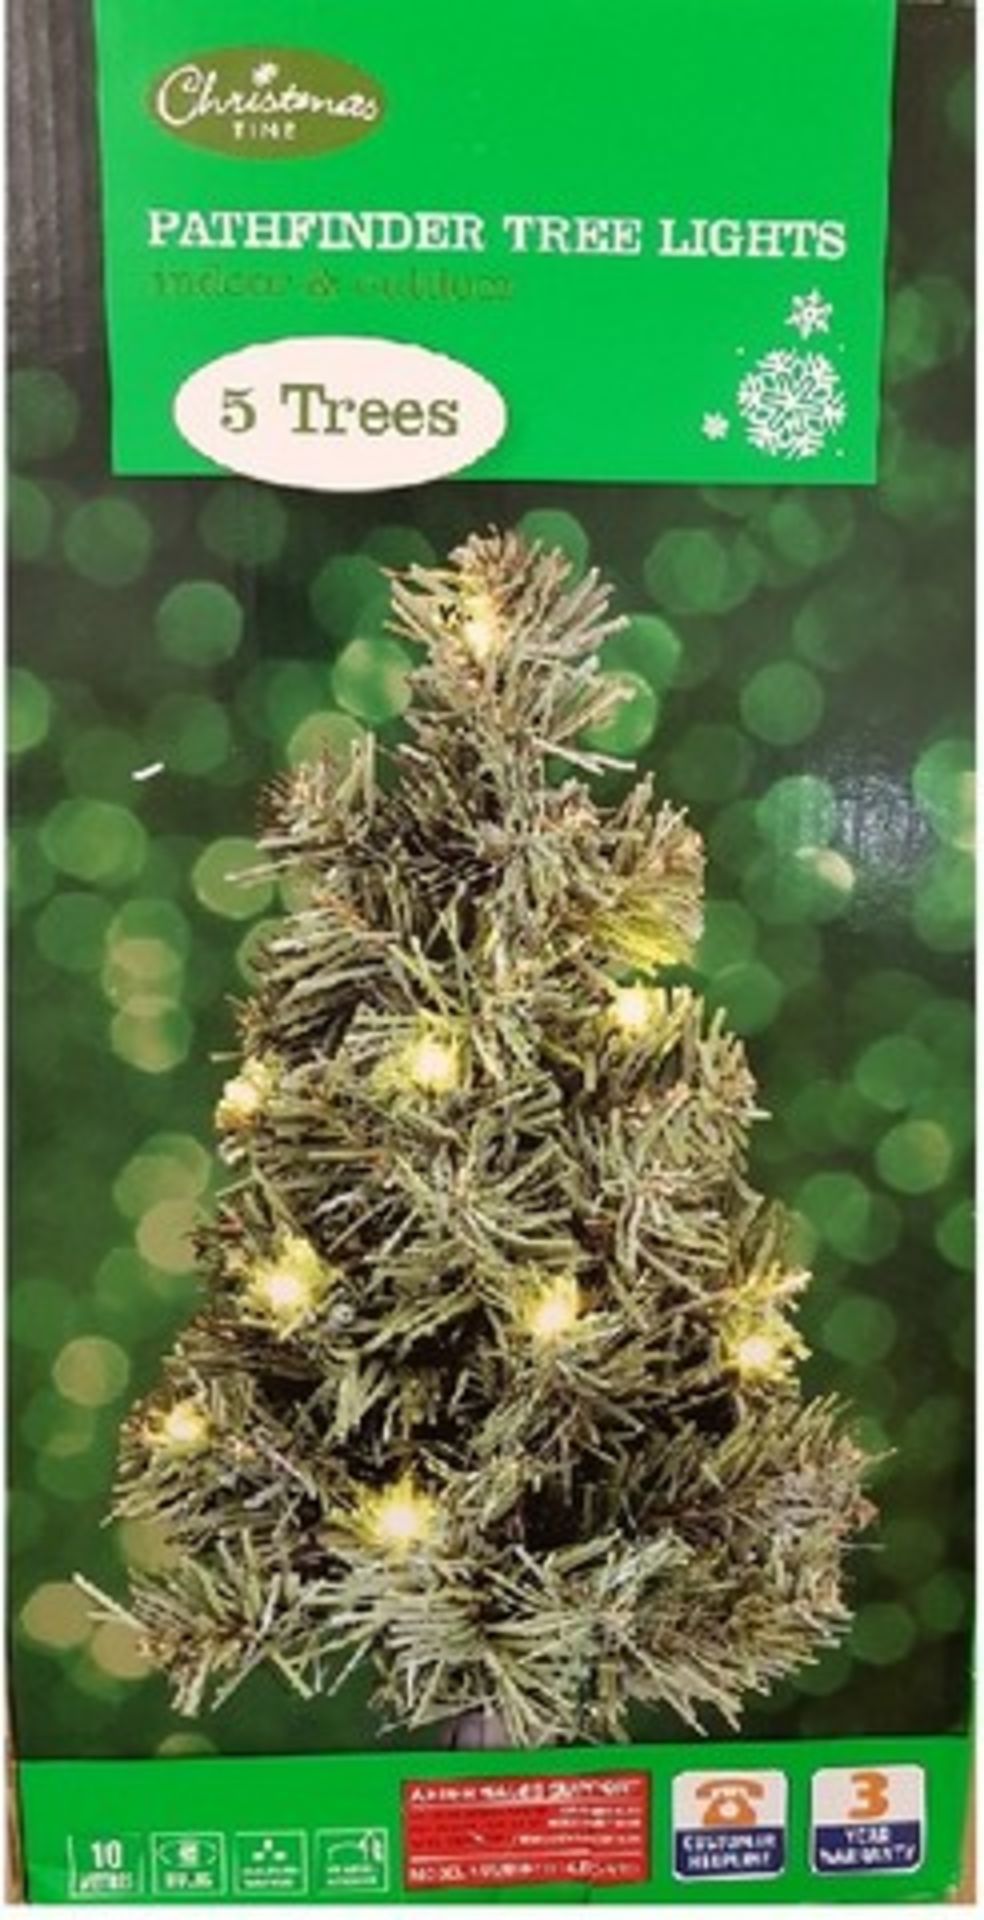 V Brand New Pathfinder Tree Lights 5 Trees Indoor/Outdoor Lights-10 Metres-45 Bulbs-Complete With